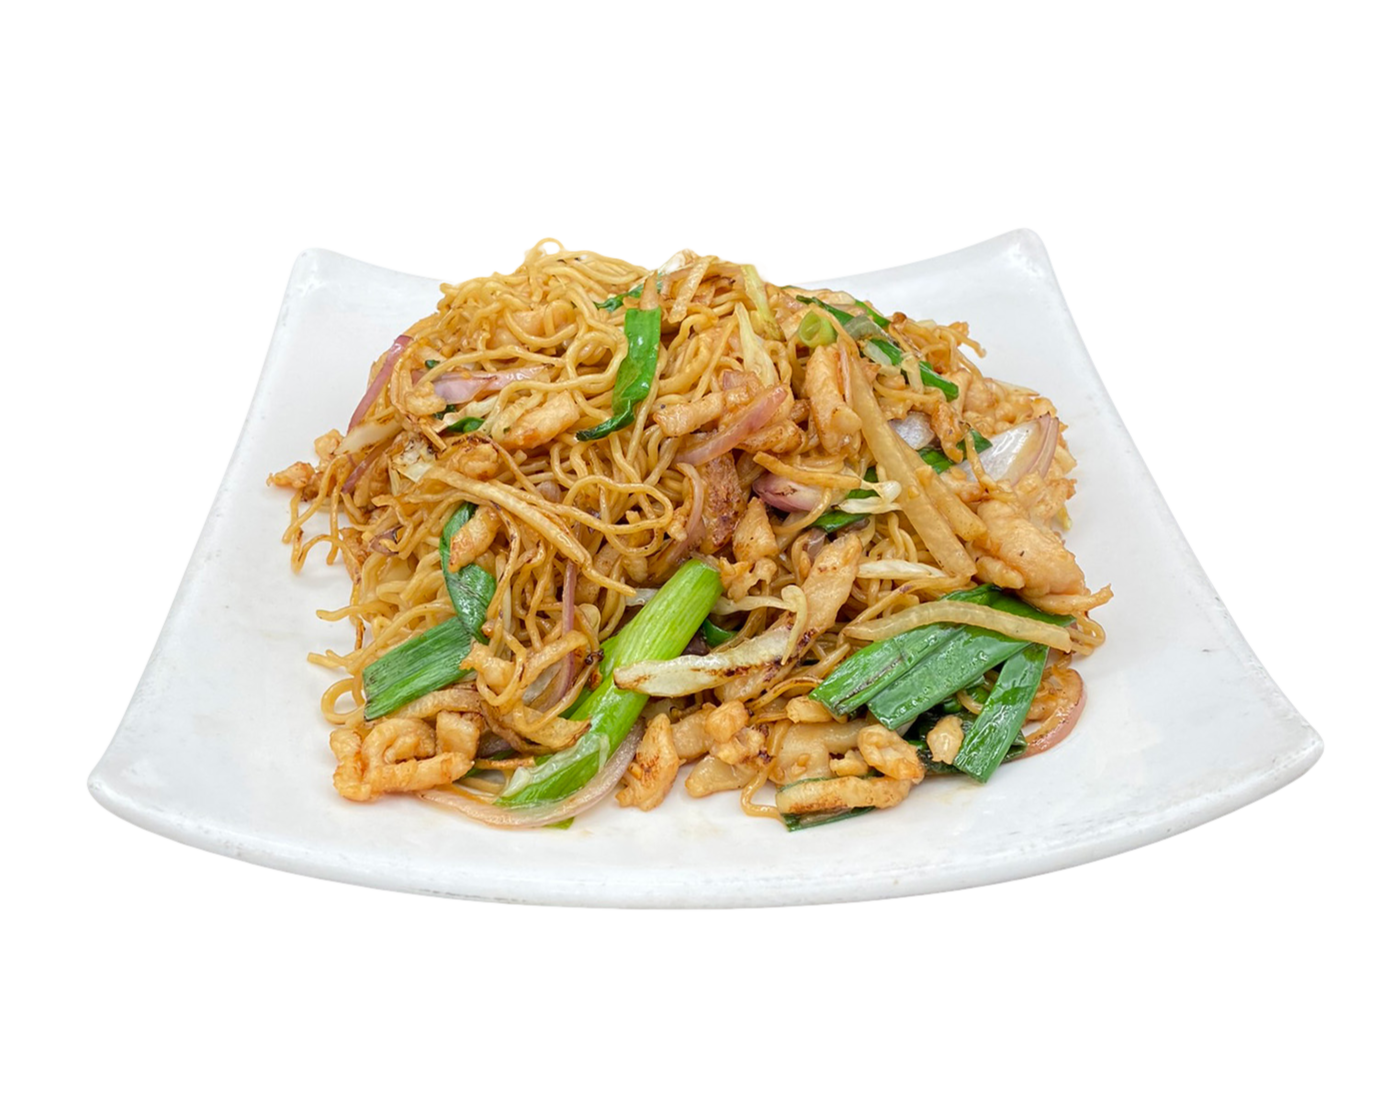 Chicken lo mein on a plate